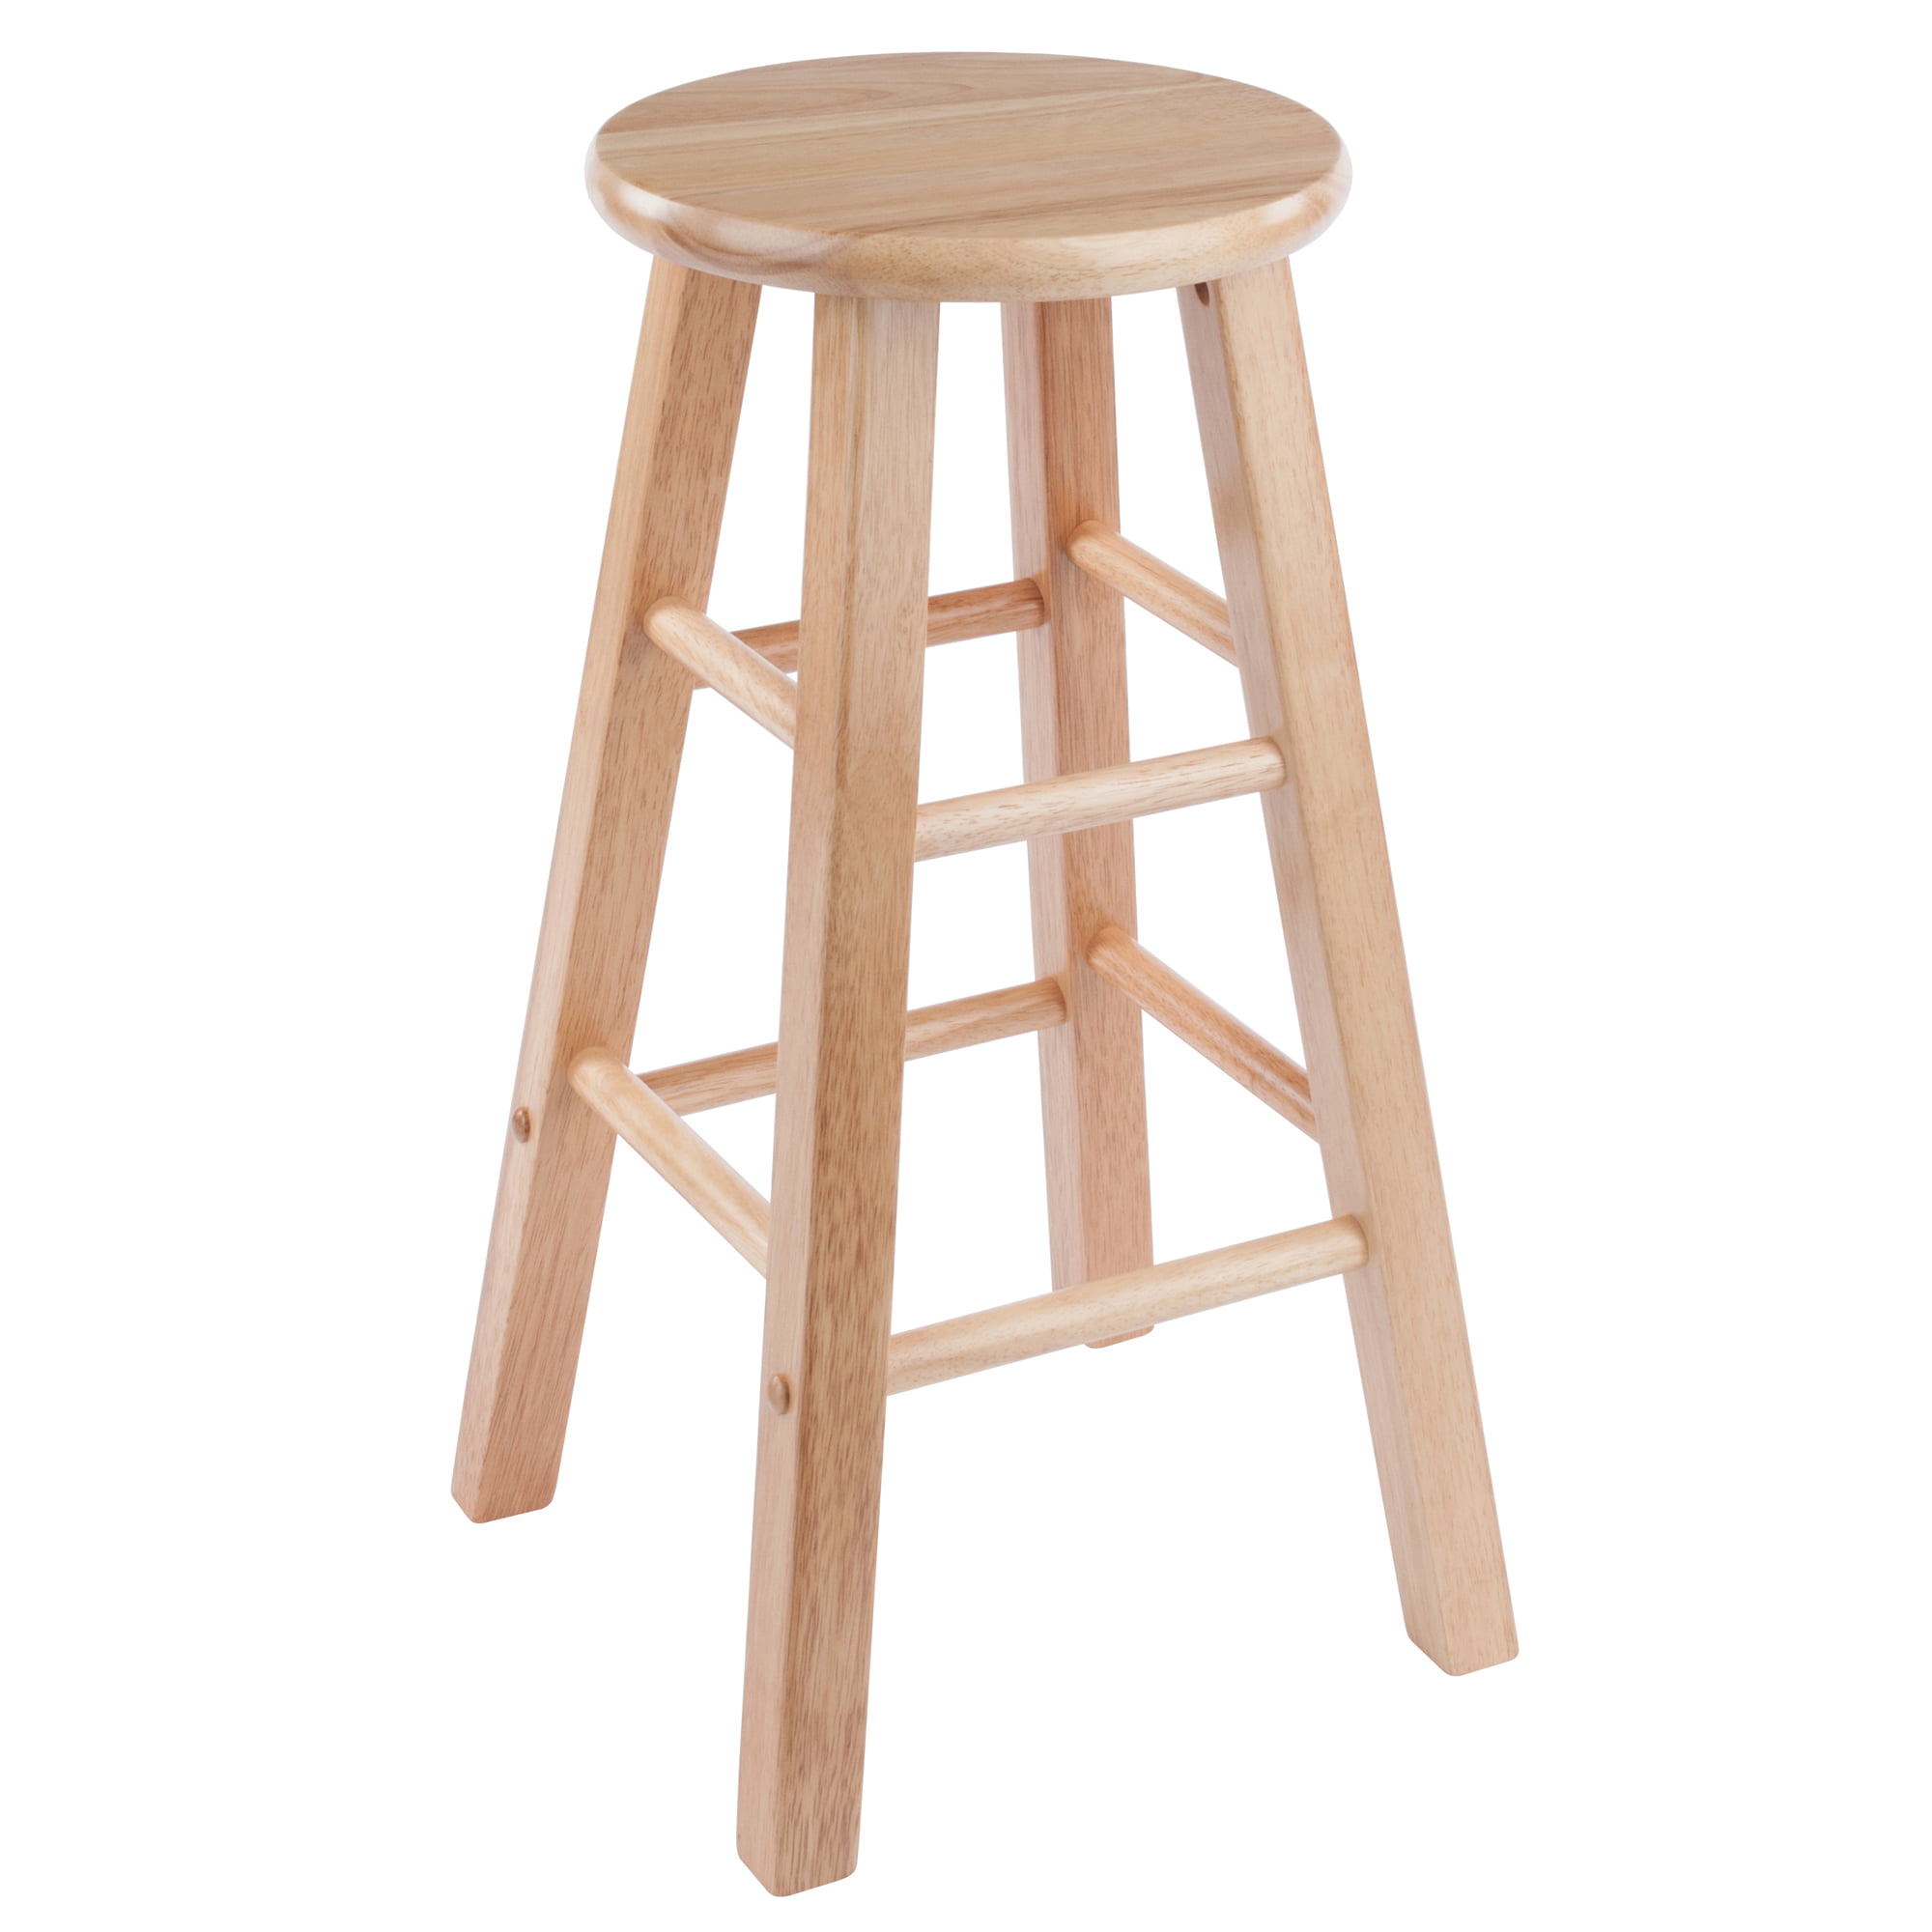 Winsome Wood Element 2-Piece Counter Stools, Natural Finish - image 3 of 8